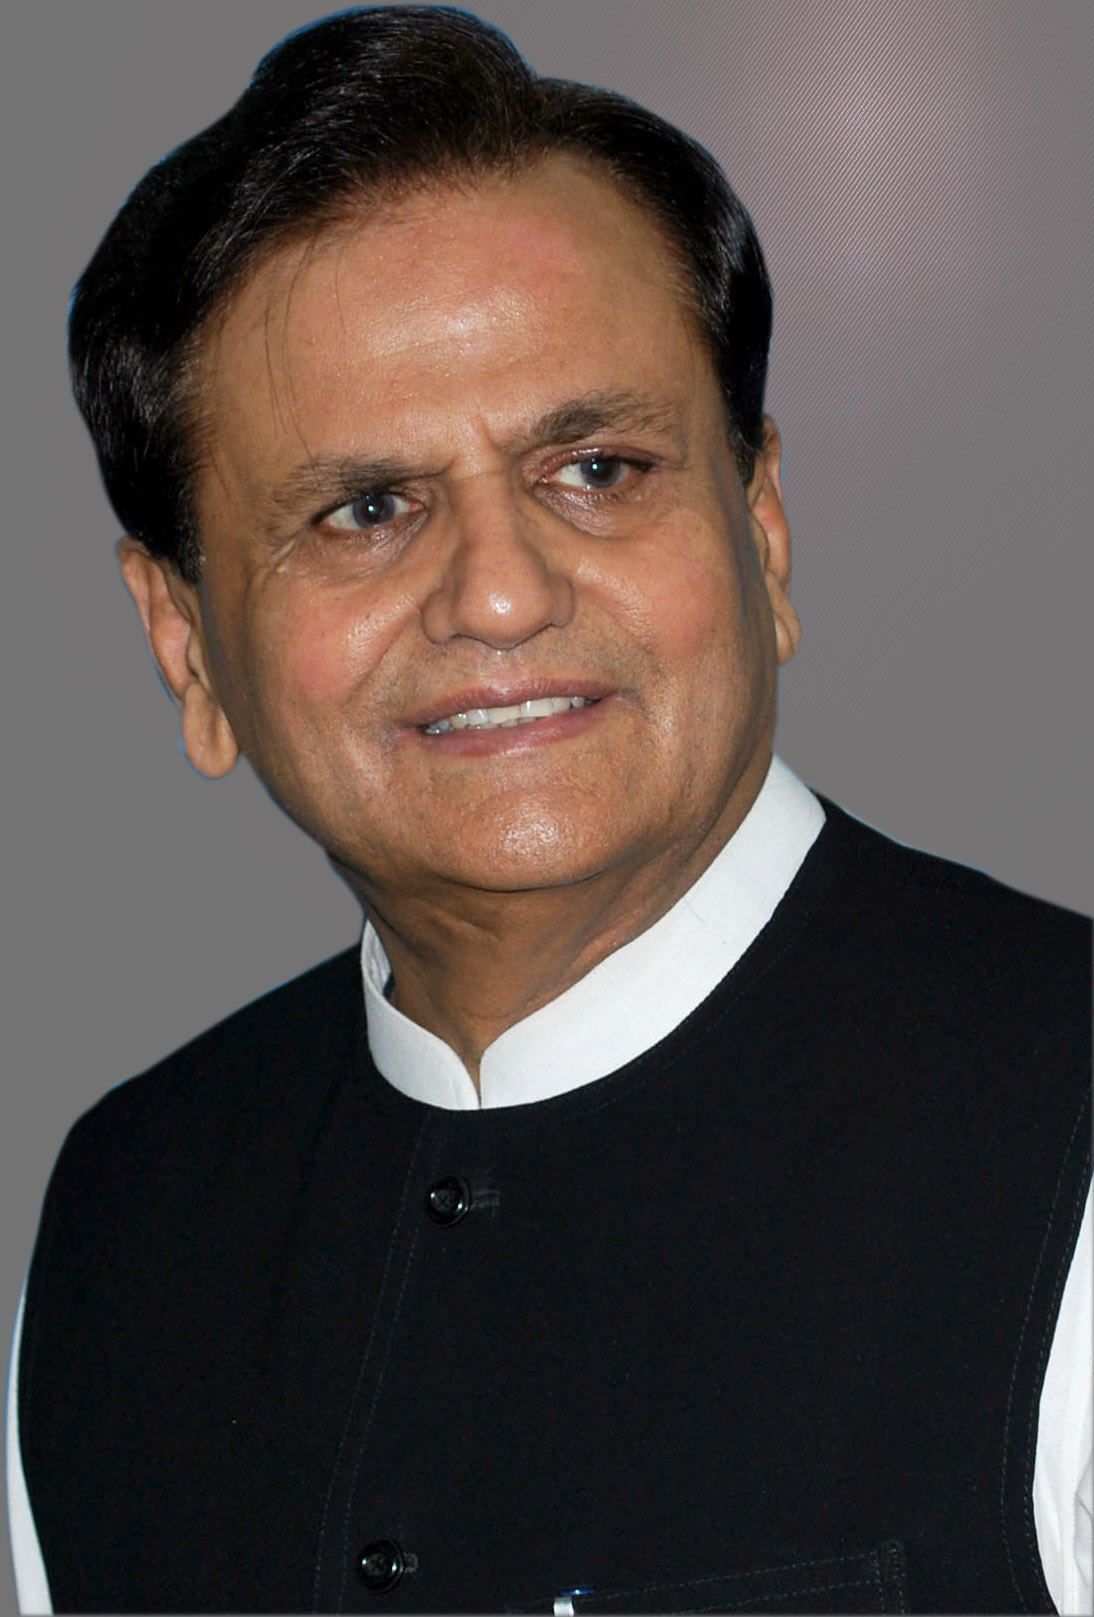 Ahmed Patel says Modi's body language a testimony to fear from Grand Alliance